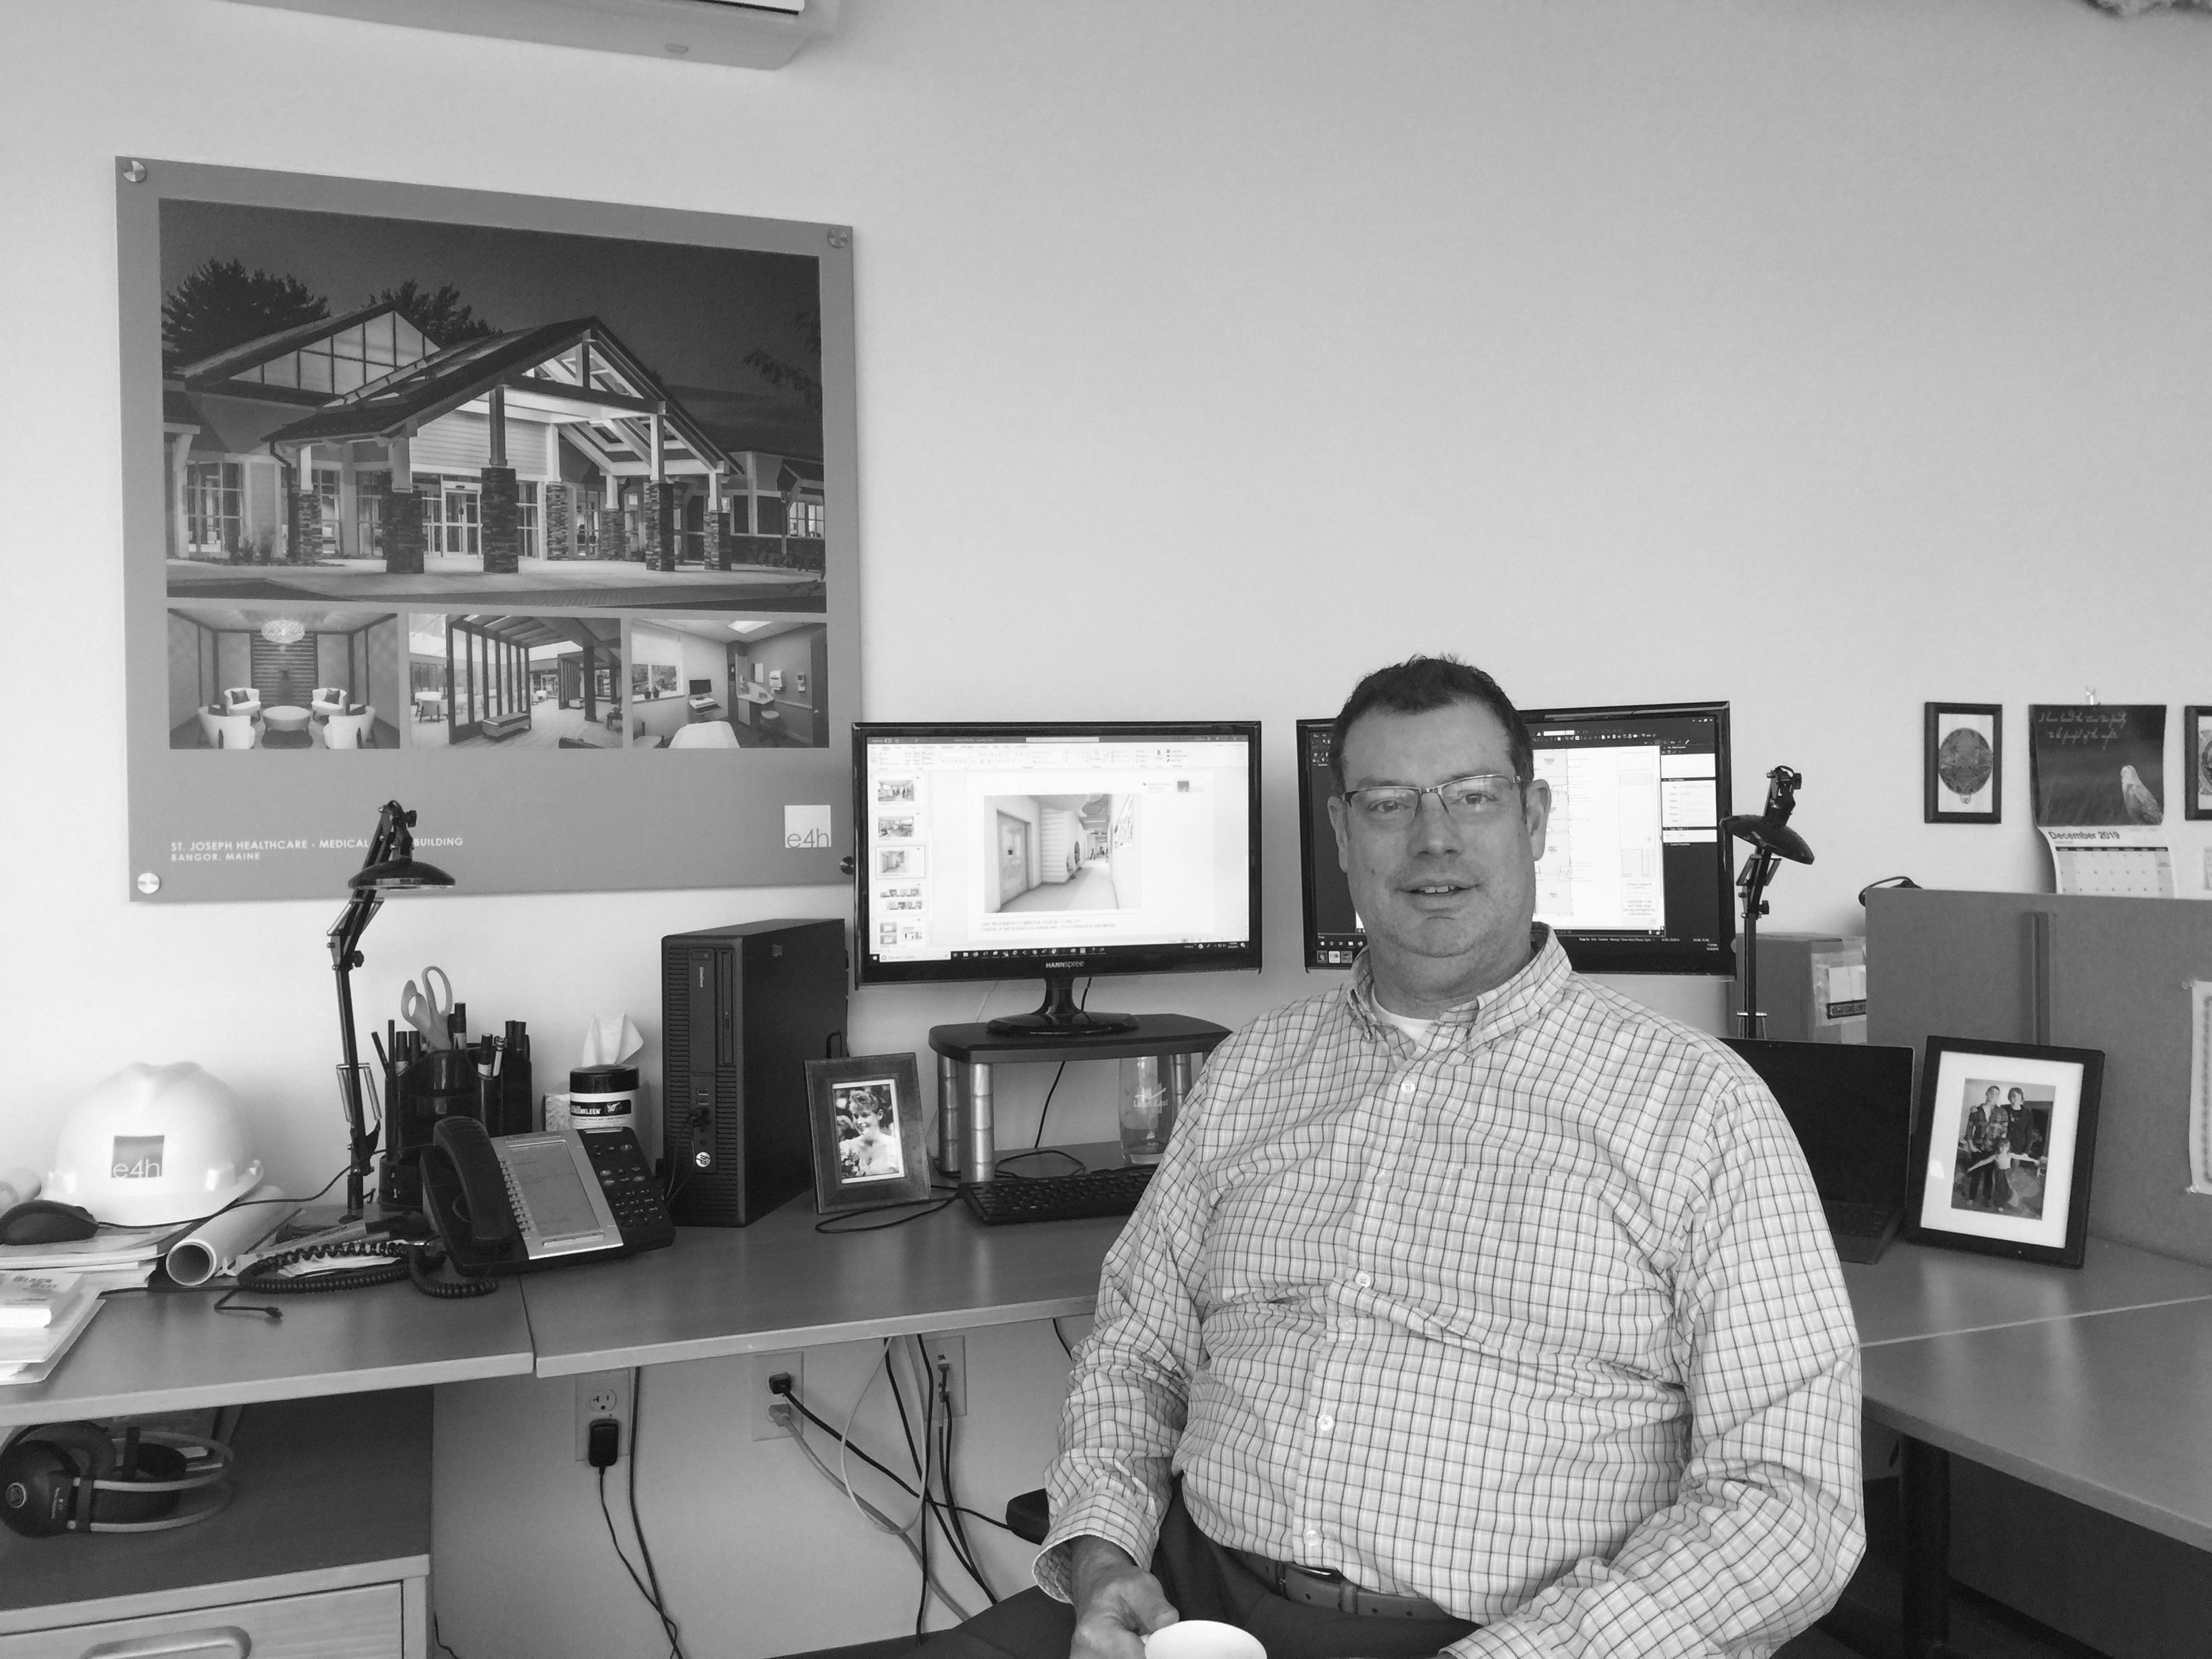 Jon Boyd, AIA Architect in his office with computer monitors and design photo on wall